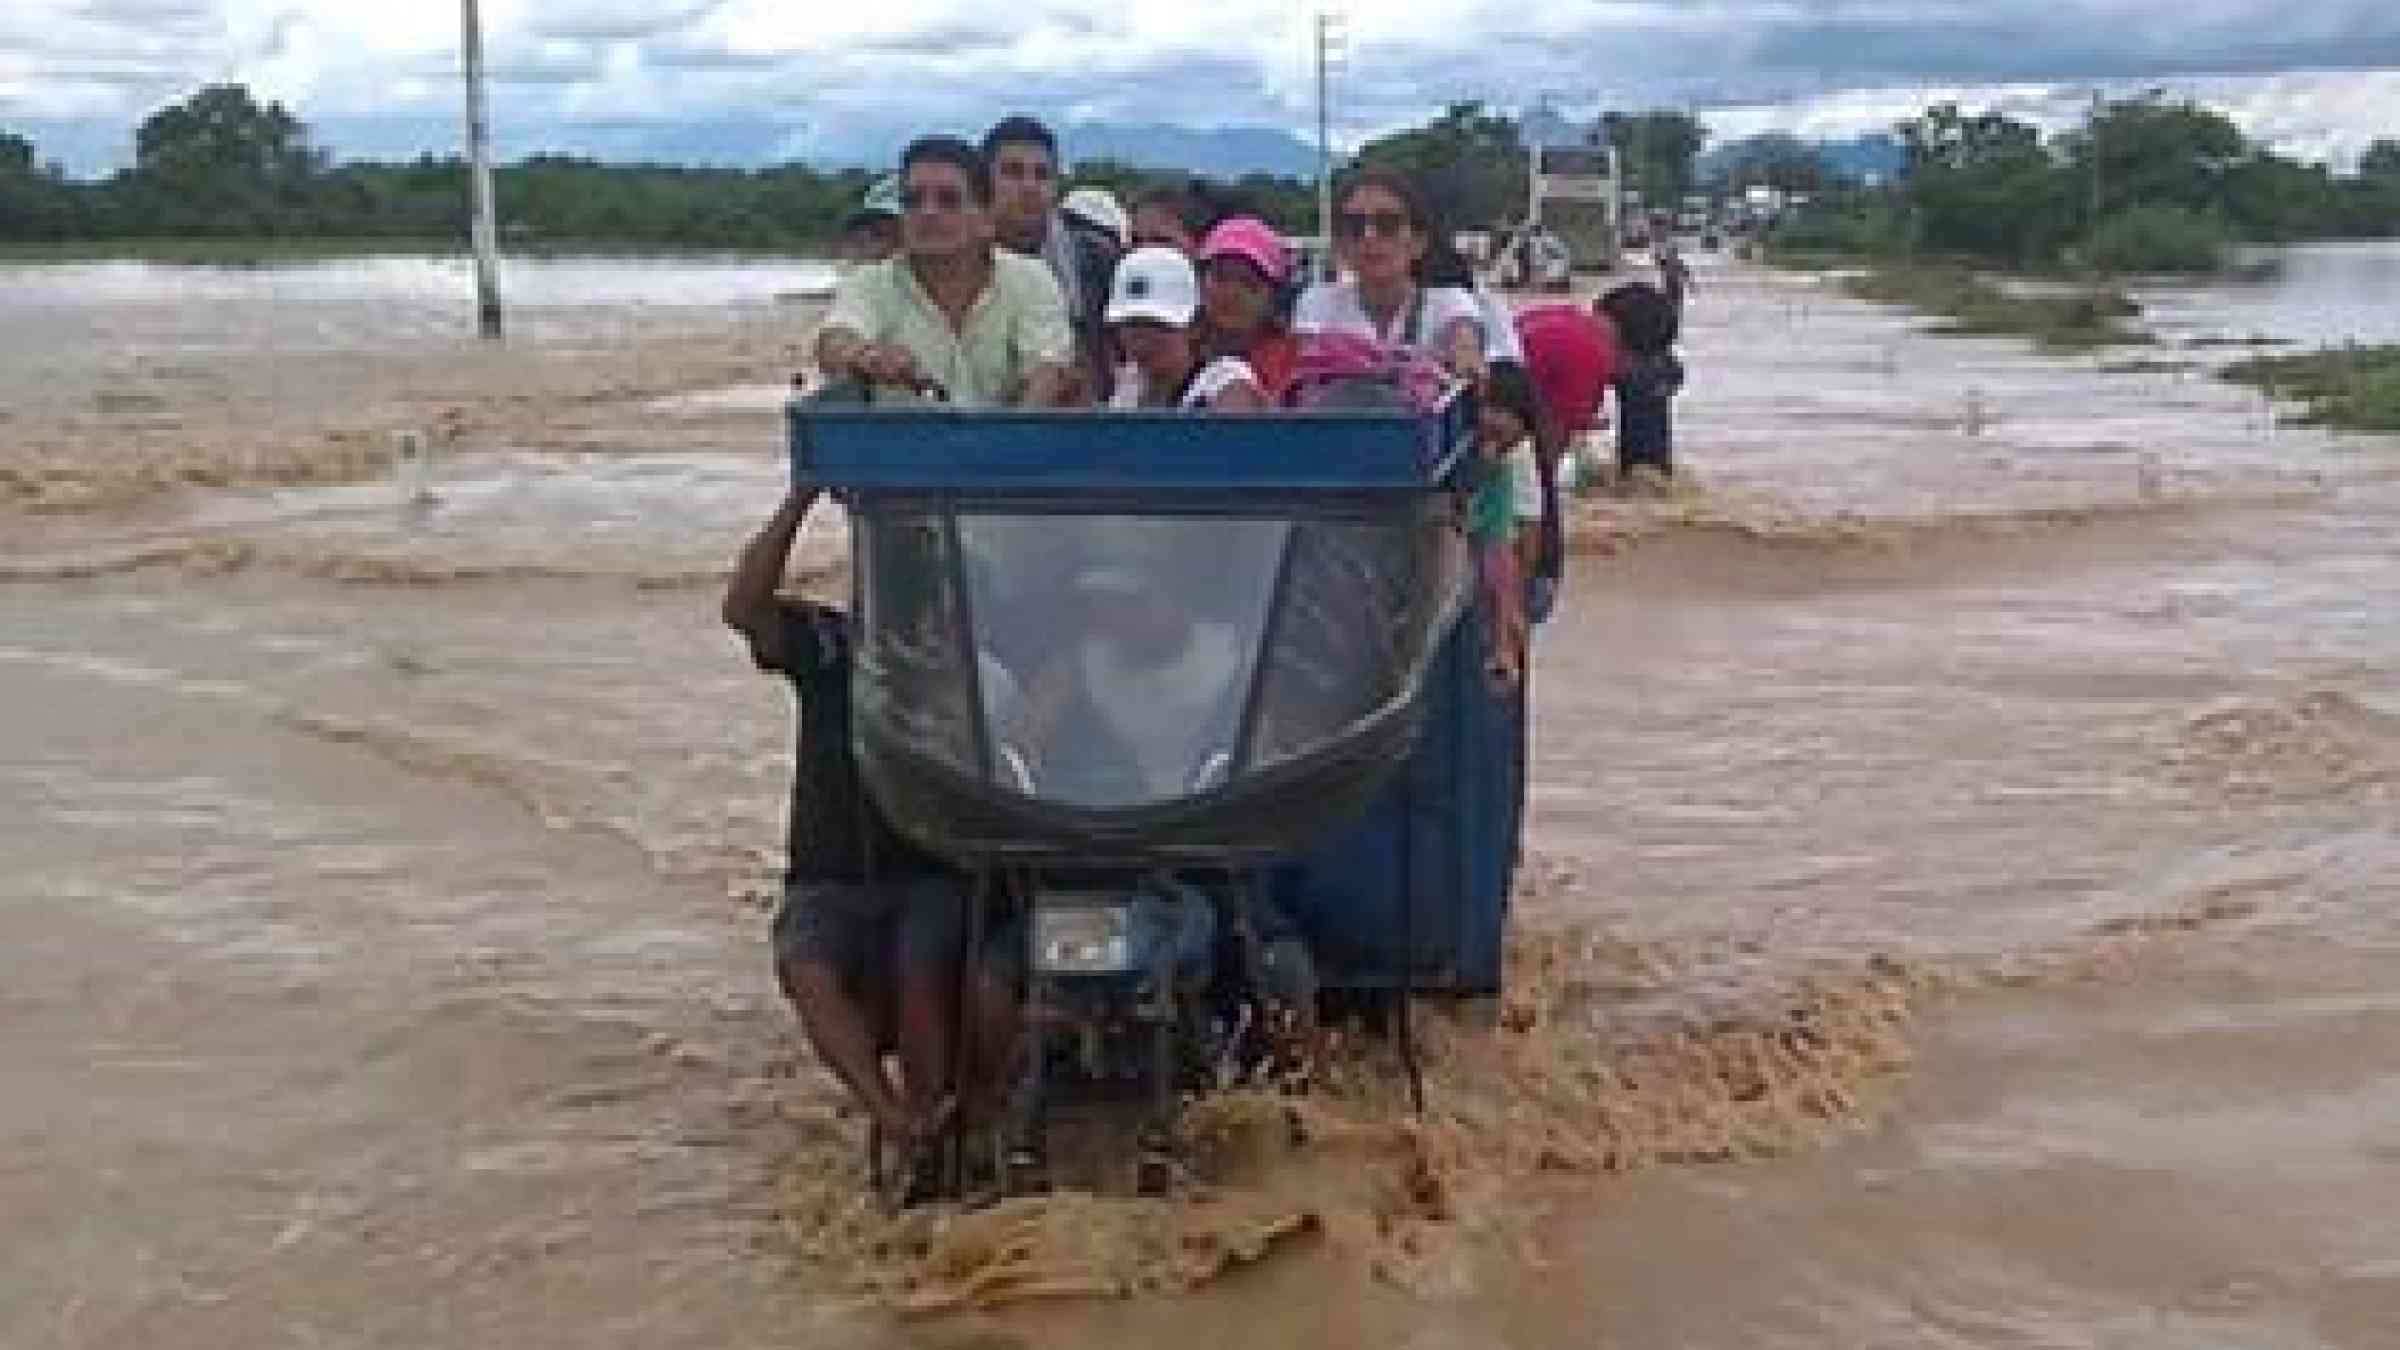 Floods in Pacora and Illimo districts, Lambayeque, Peru over the last 3 days. (Photo Twitter: @LilianaCapu @ginacarbajal)